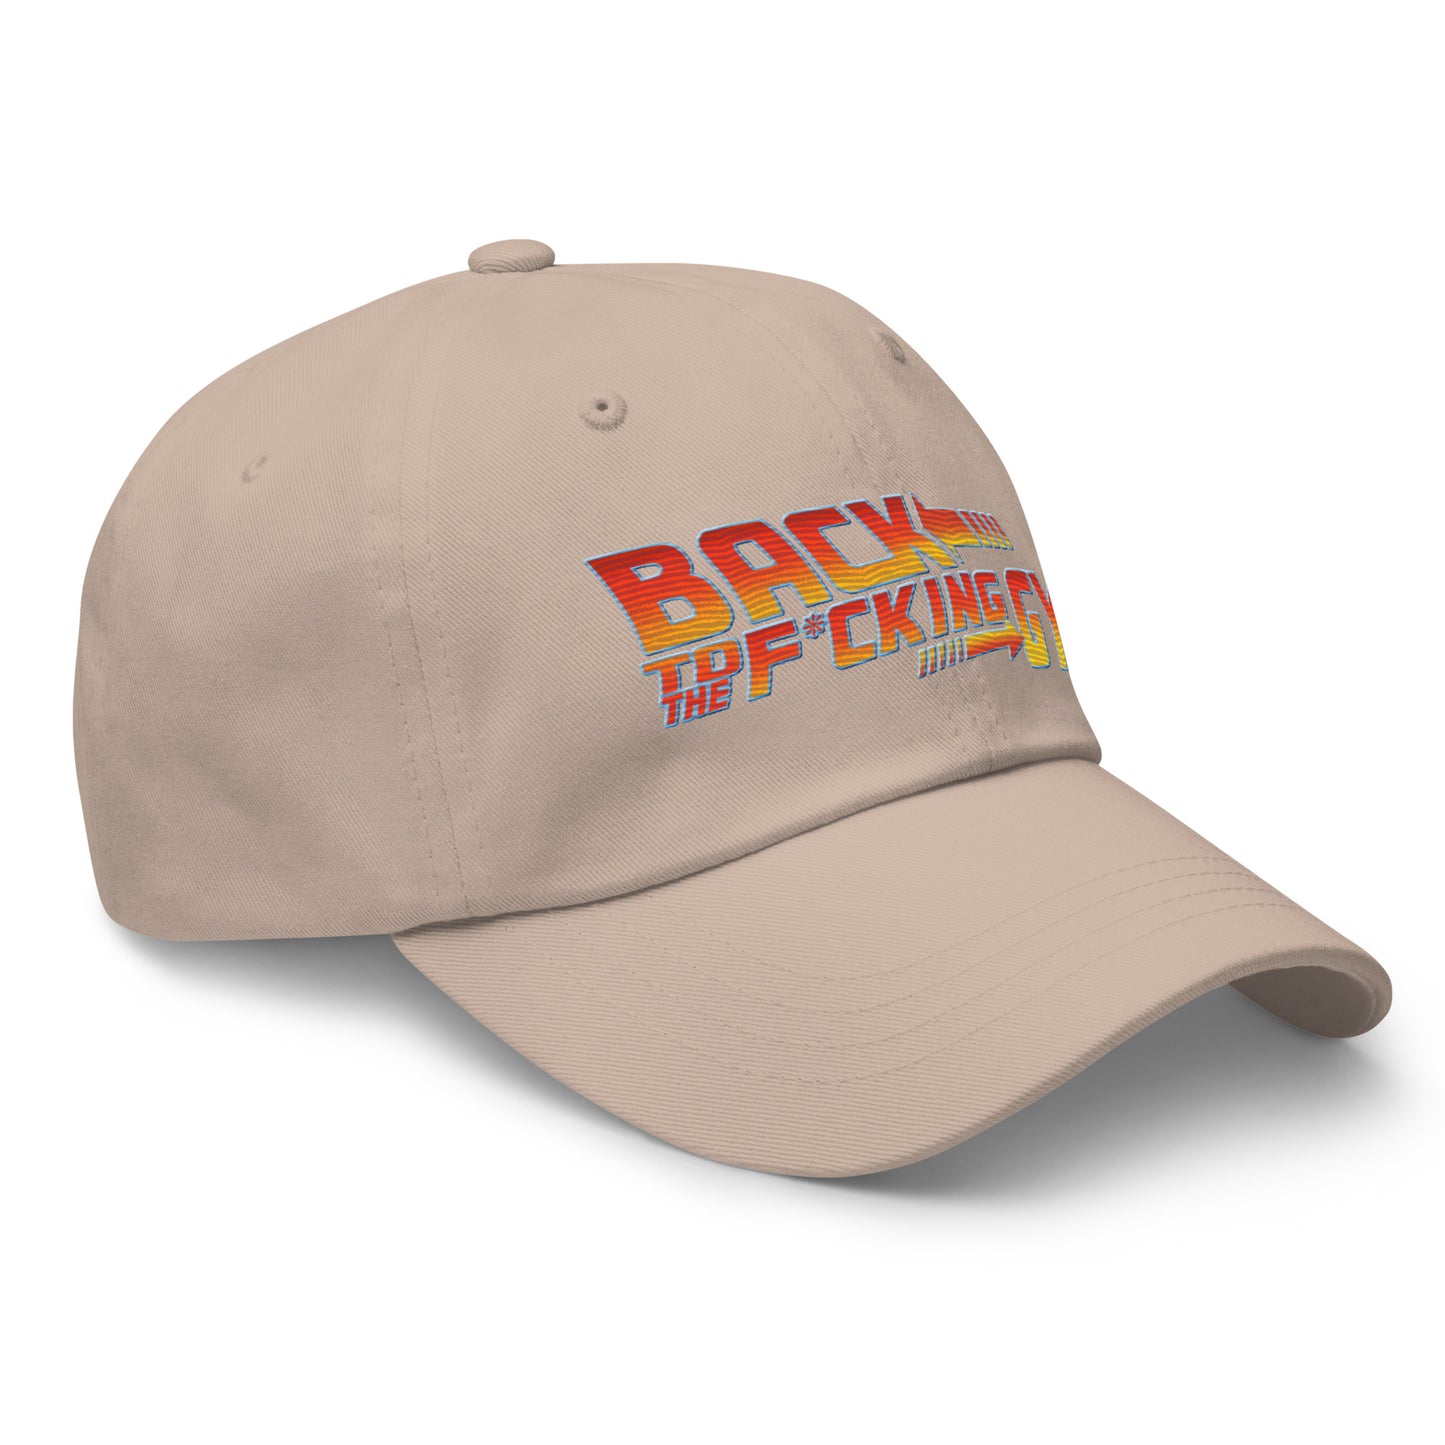 Back To The F*cking Gym Dad Hat